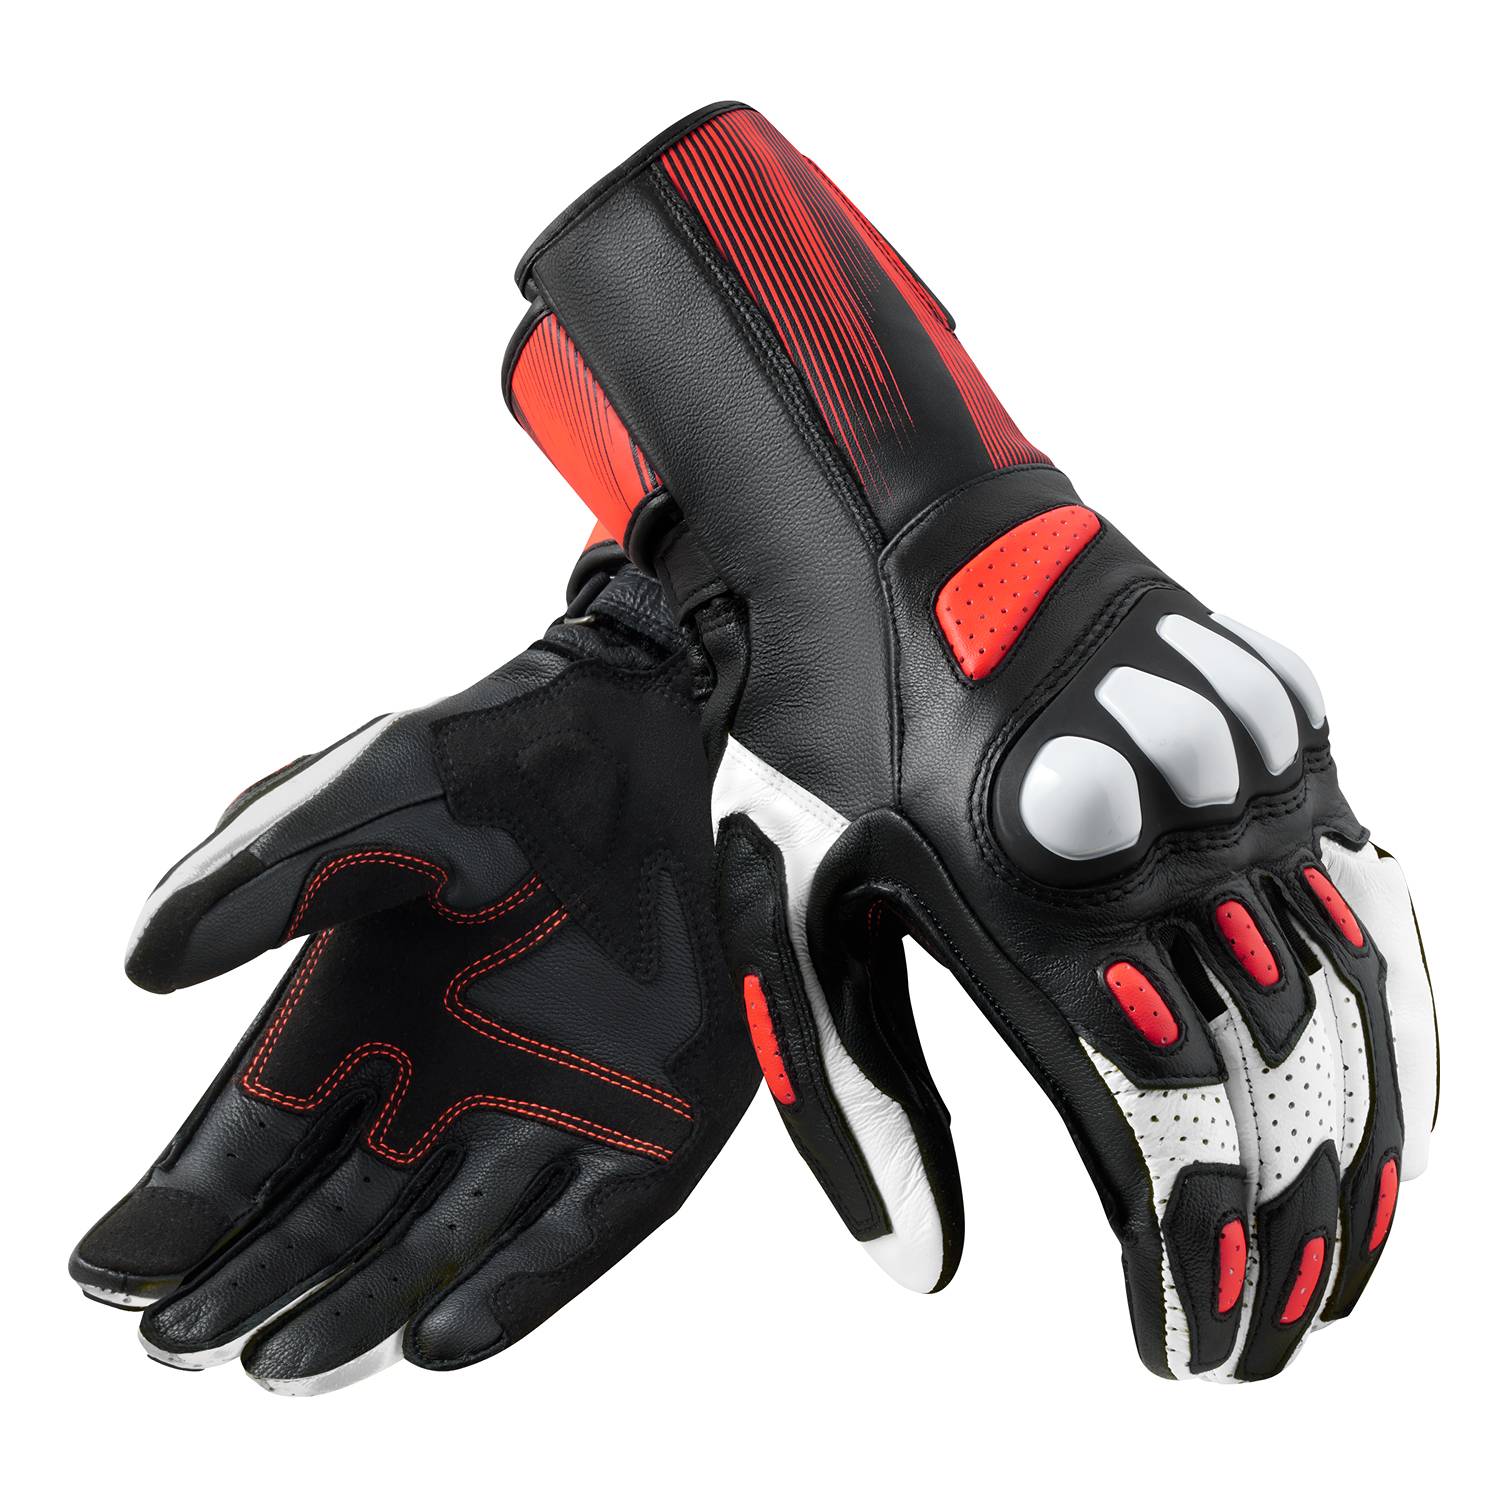 Image of REV'IT! Metis 2 Gloves Black Neon Red Size 2XL ID 8700001360463